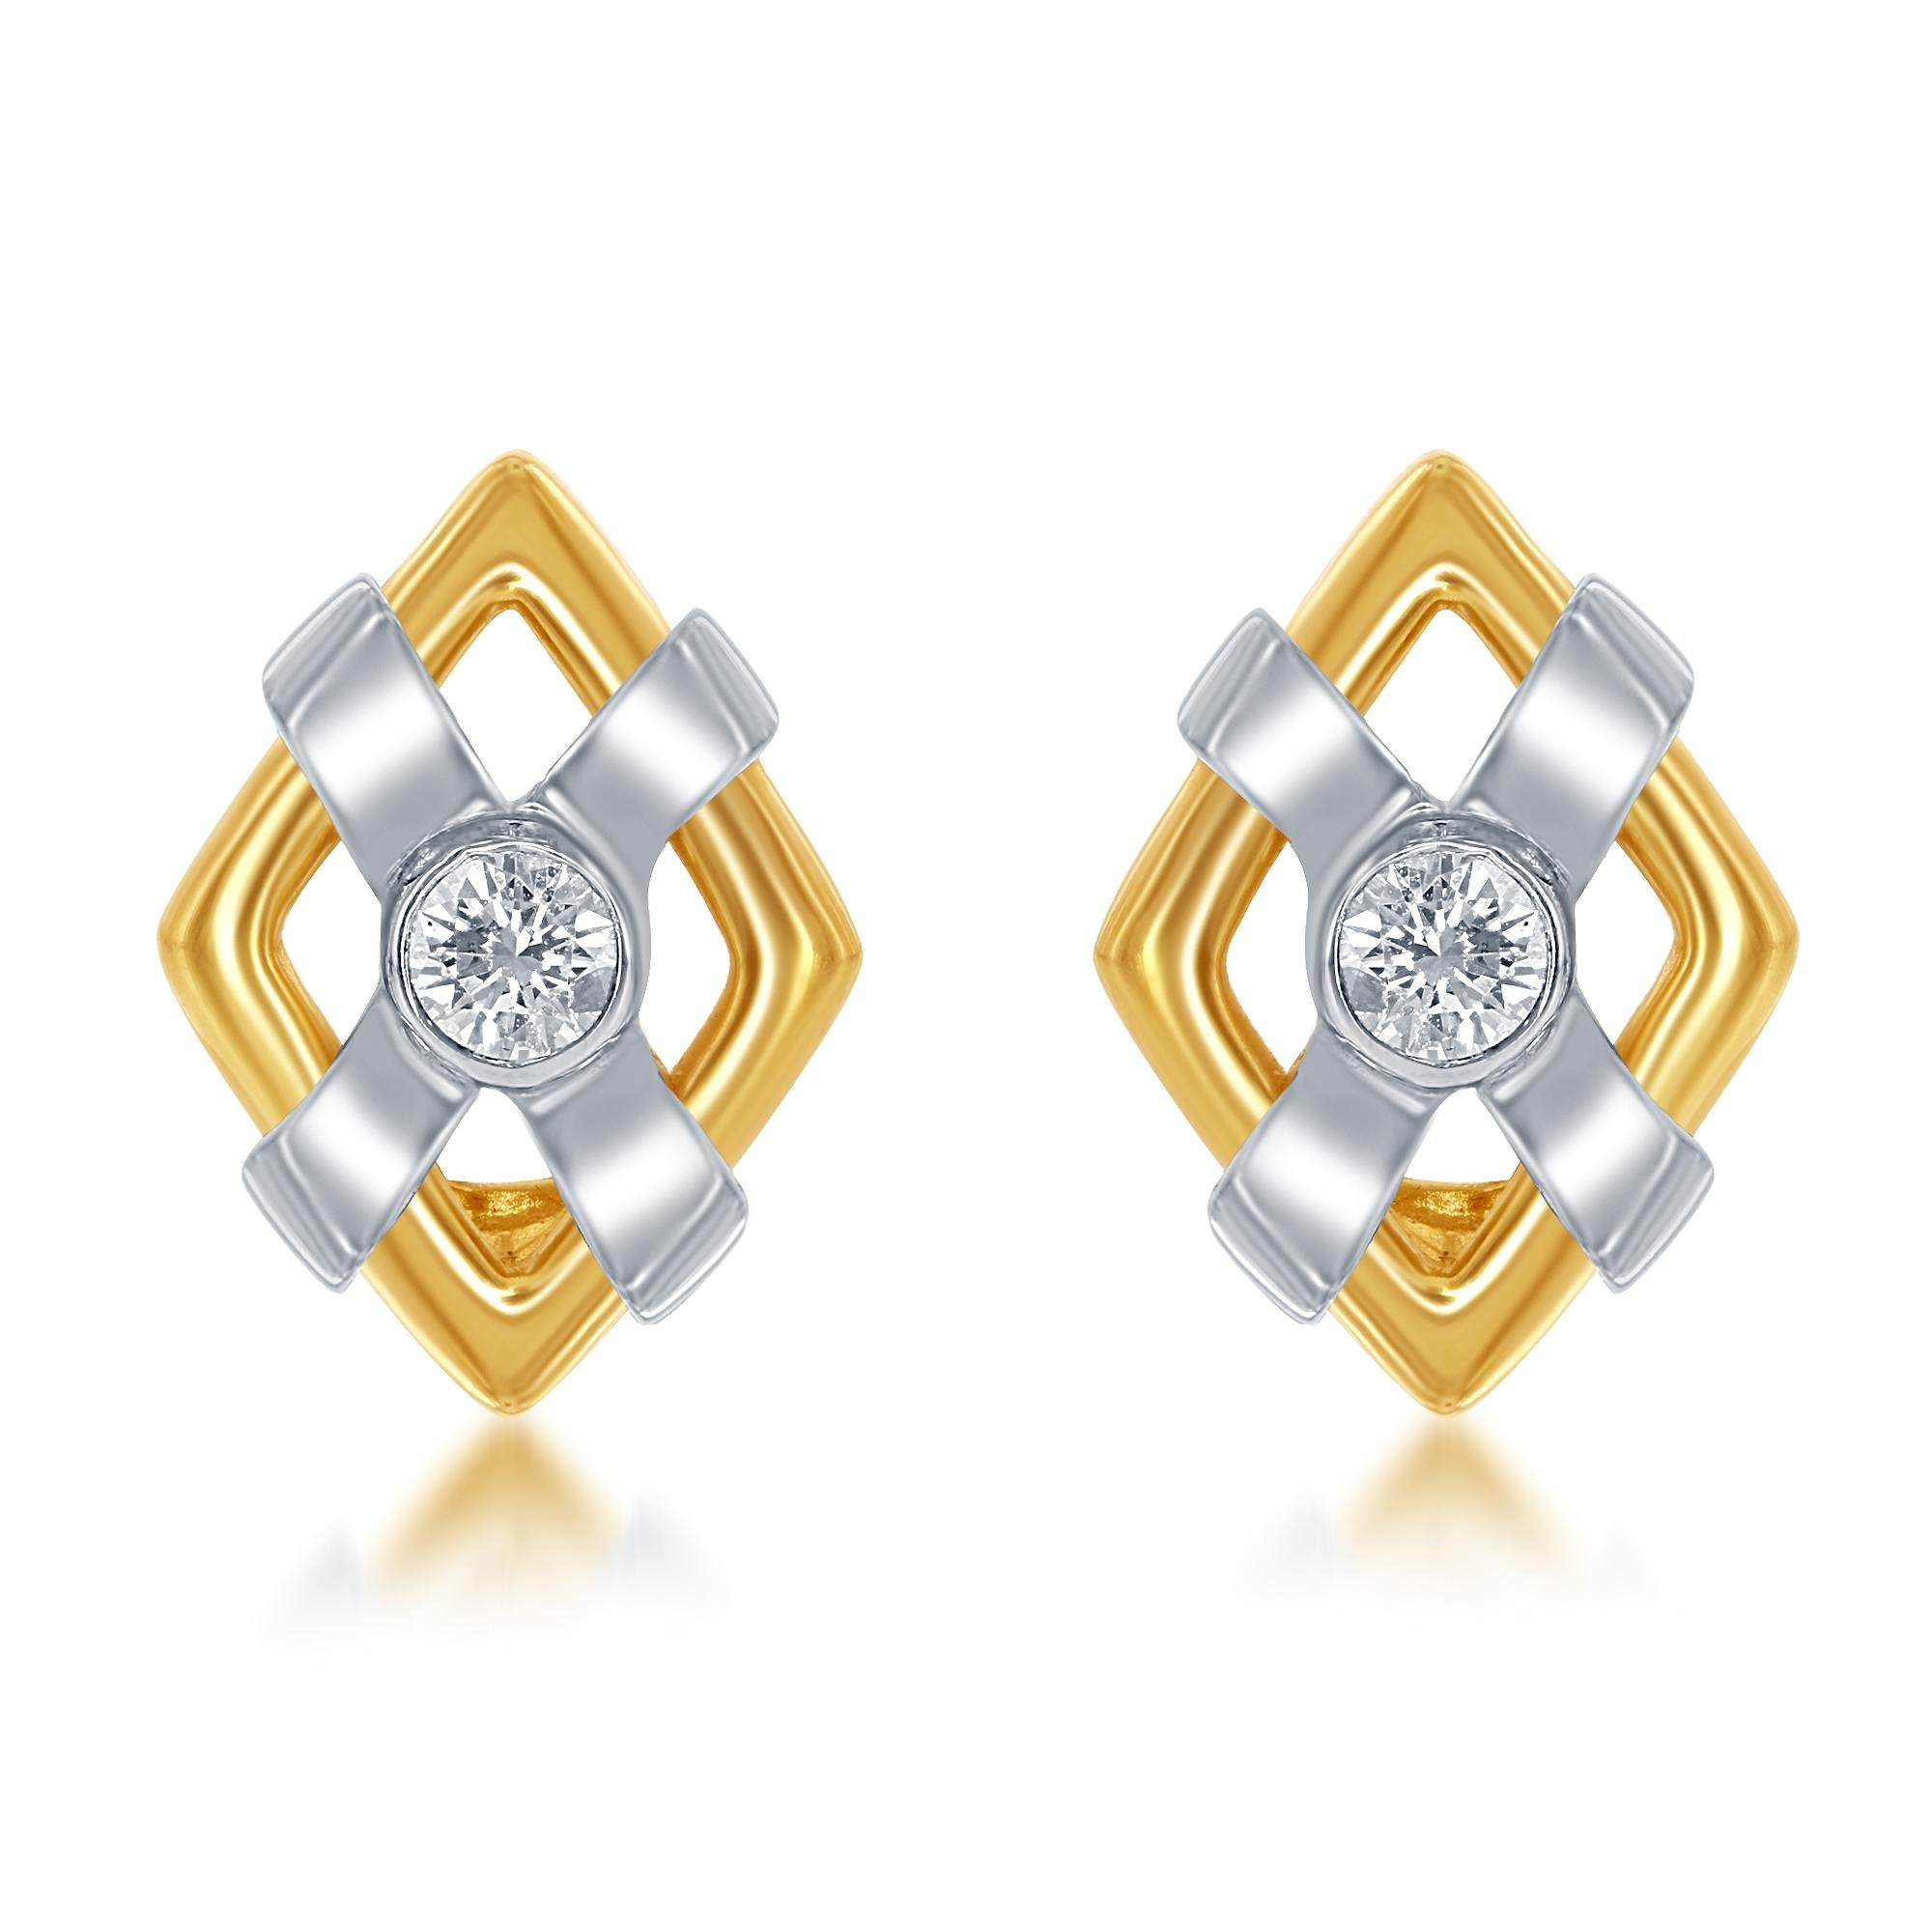 Modern Diana M. 14 kt White and Yellow Gold Diamond Earrings Containing 0.50 cts  For Sale